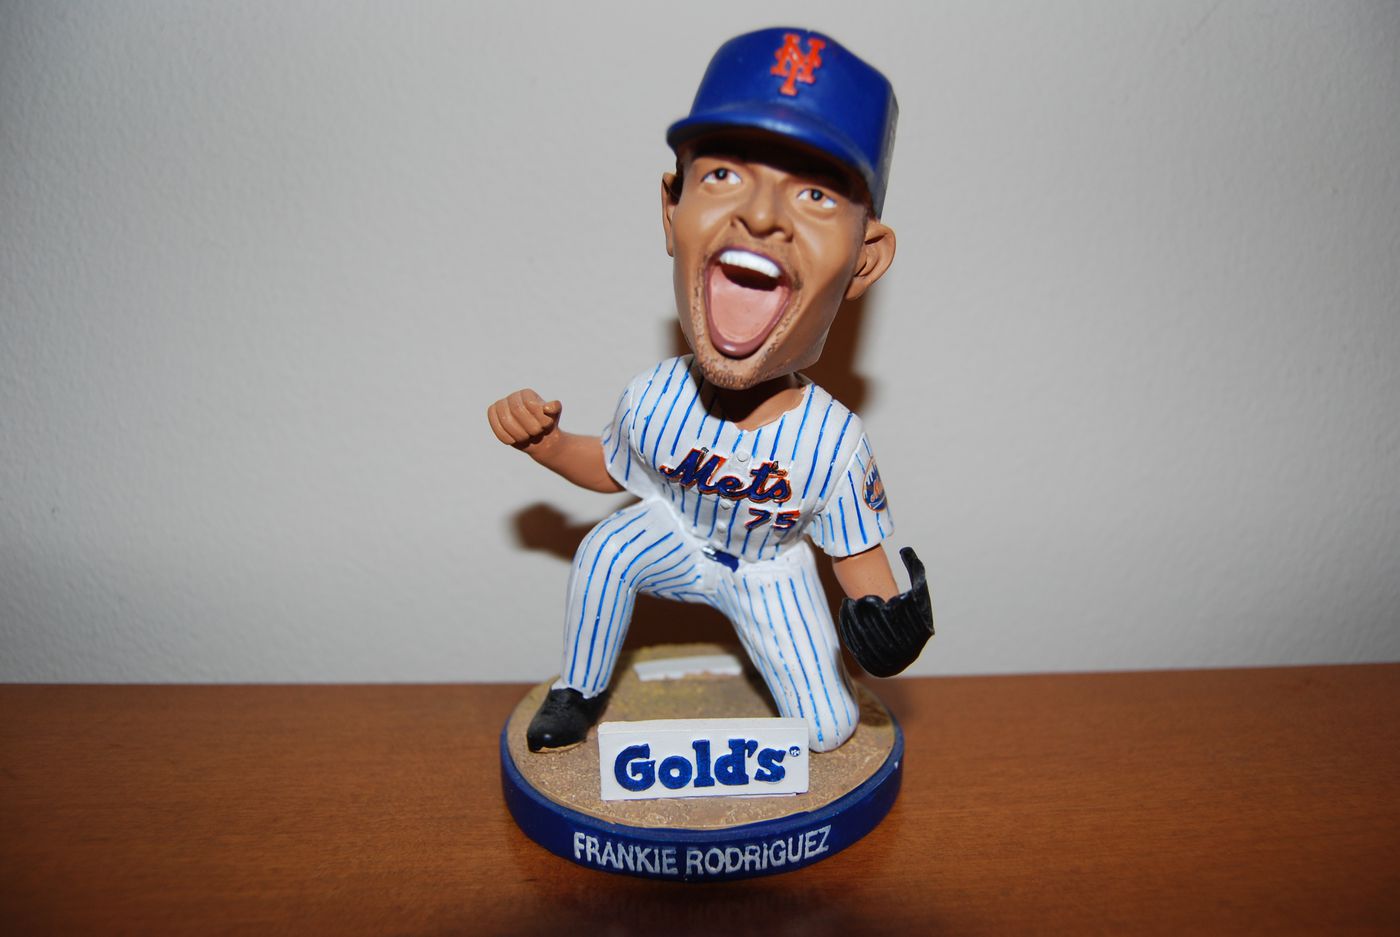 Mike Piazza 2001 New York Mets Play Makers Bobblehead Bobble with great bobbing action! 